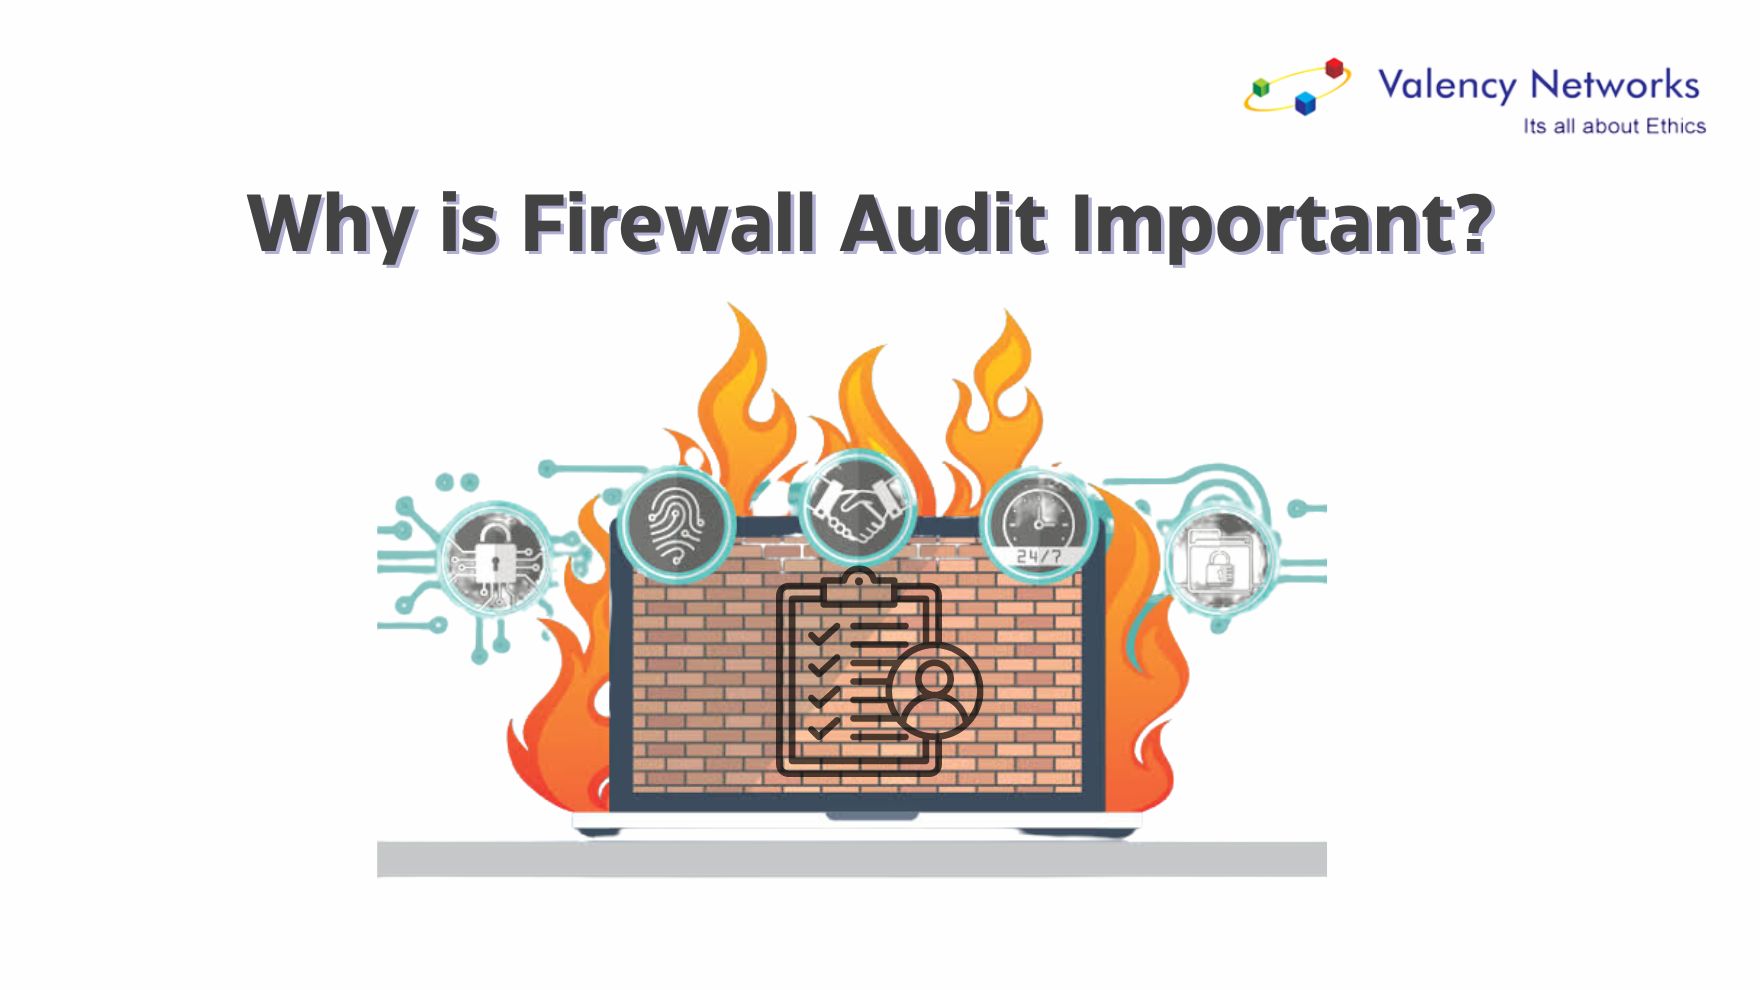 Why is Firewall Audit Important?